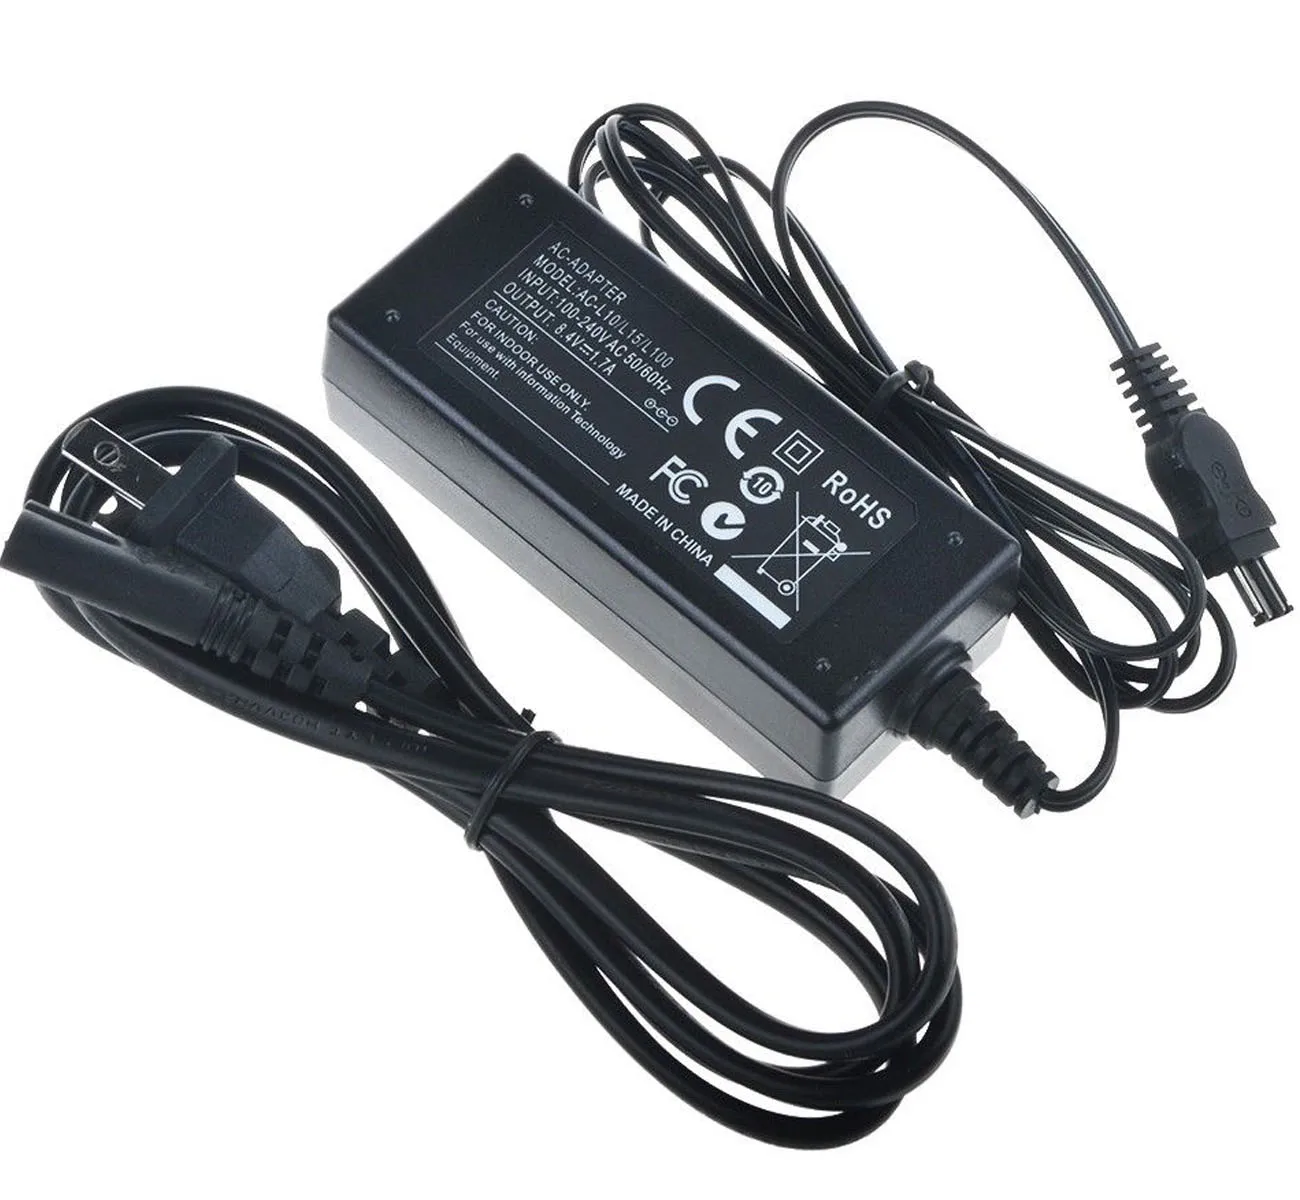 Taelectric AC Wall Battery Power Charger Adapter Compatible Sony DCR-DVD810E DCRDVD810E DVD810E Handycam 